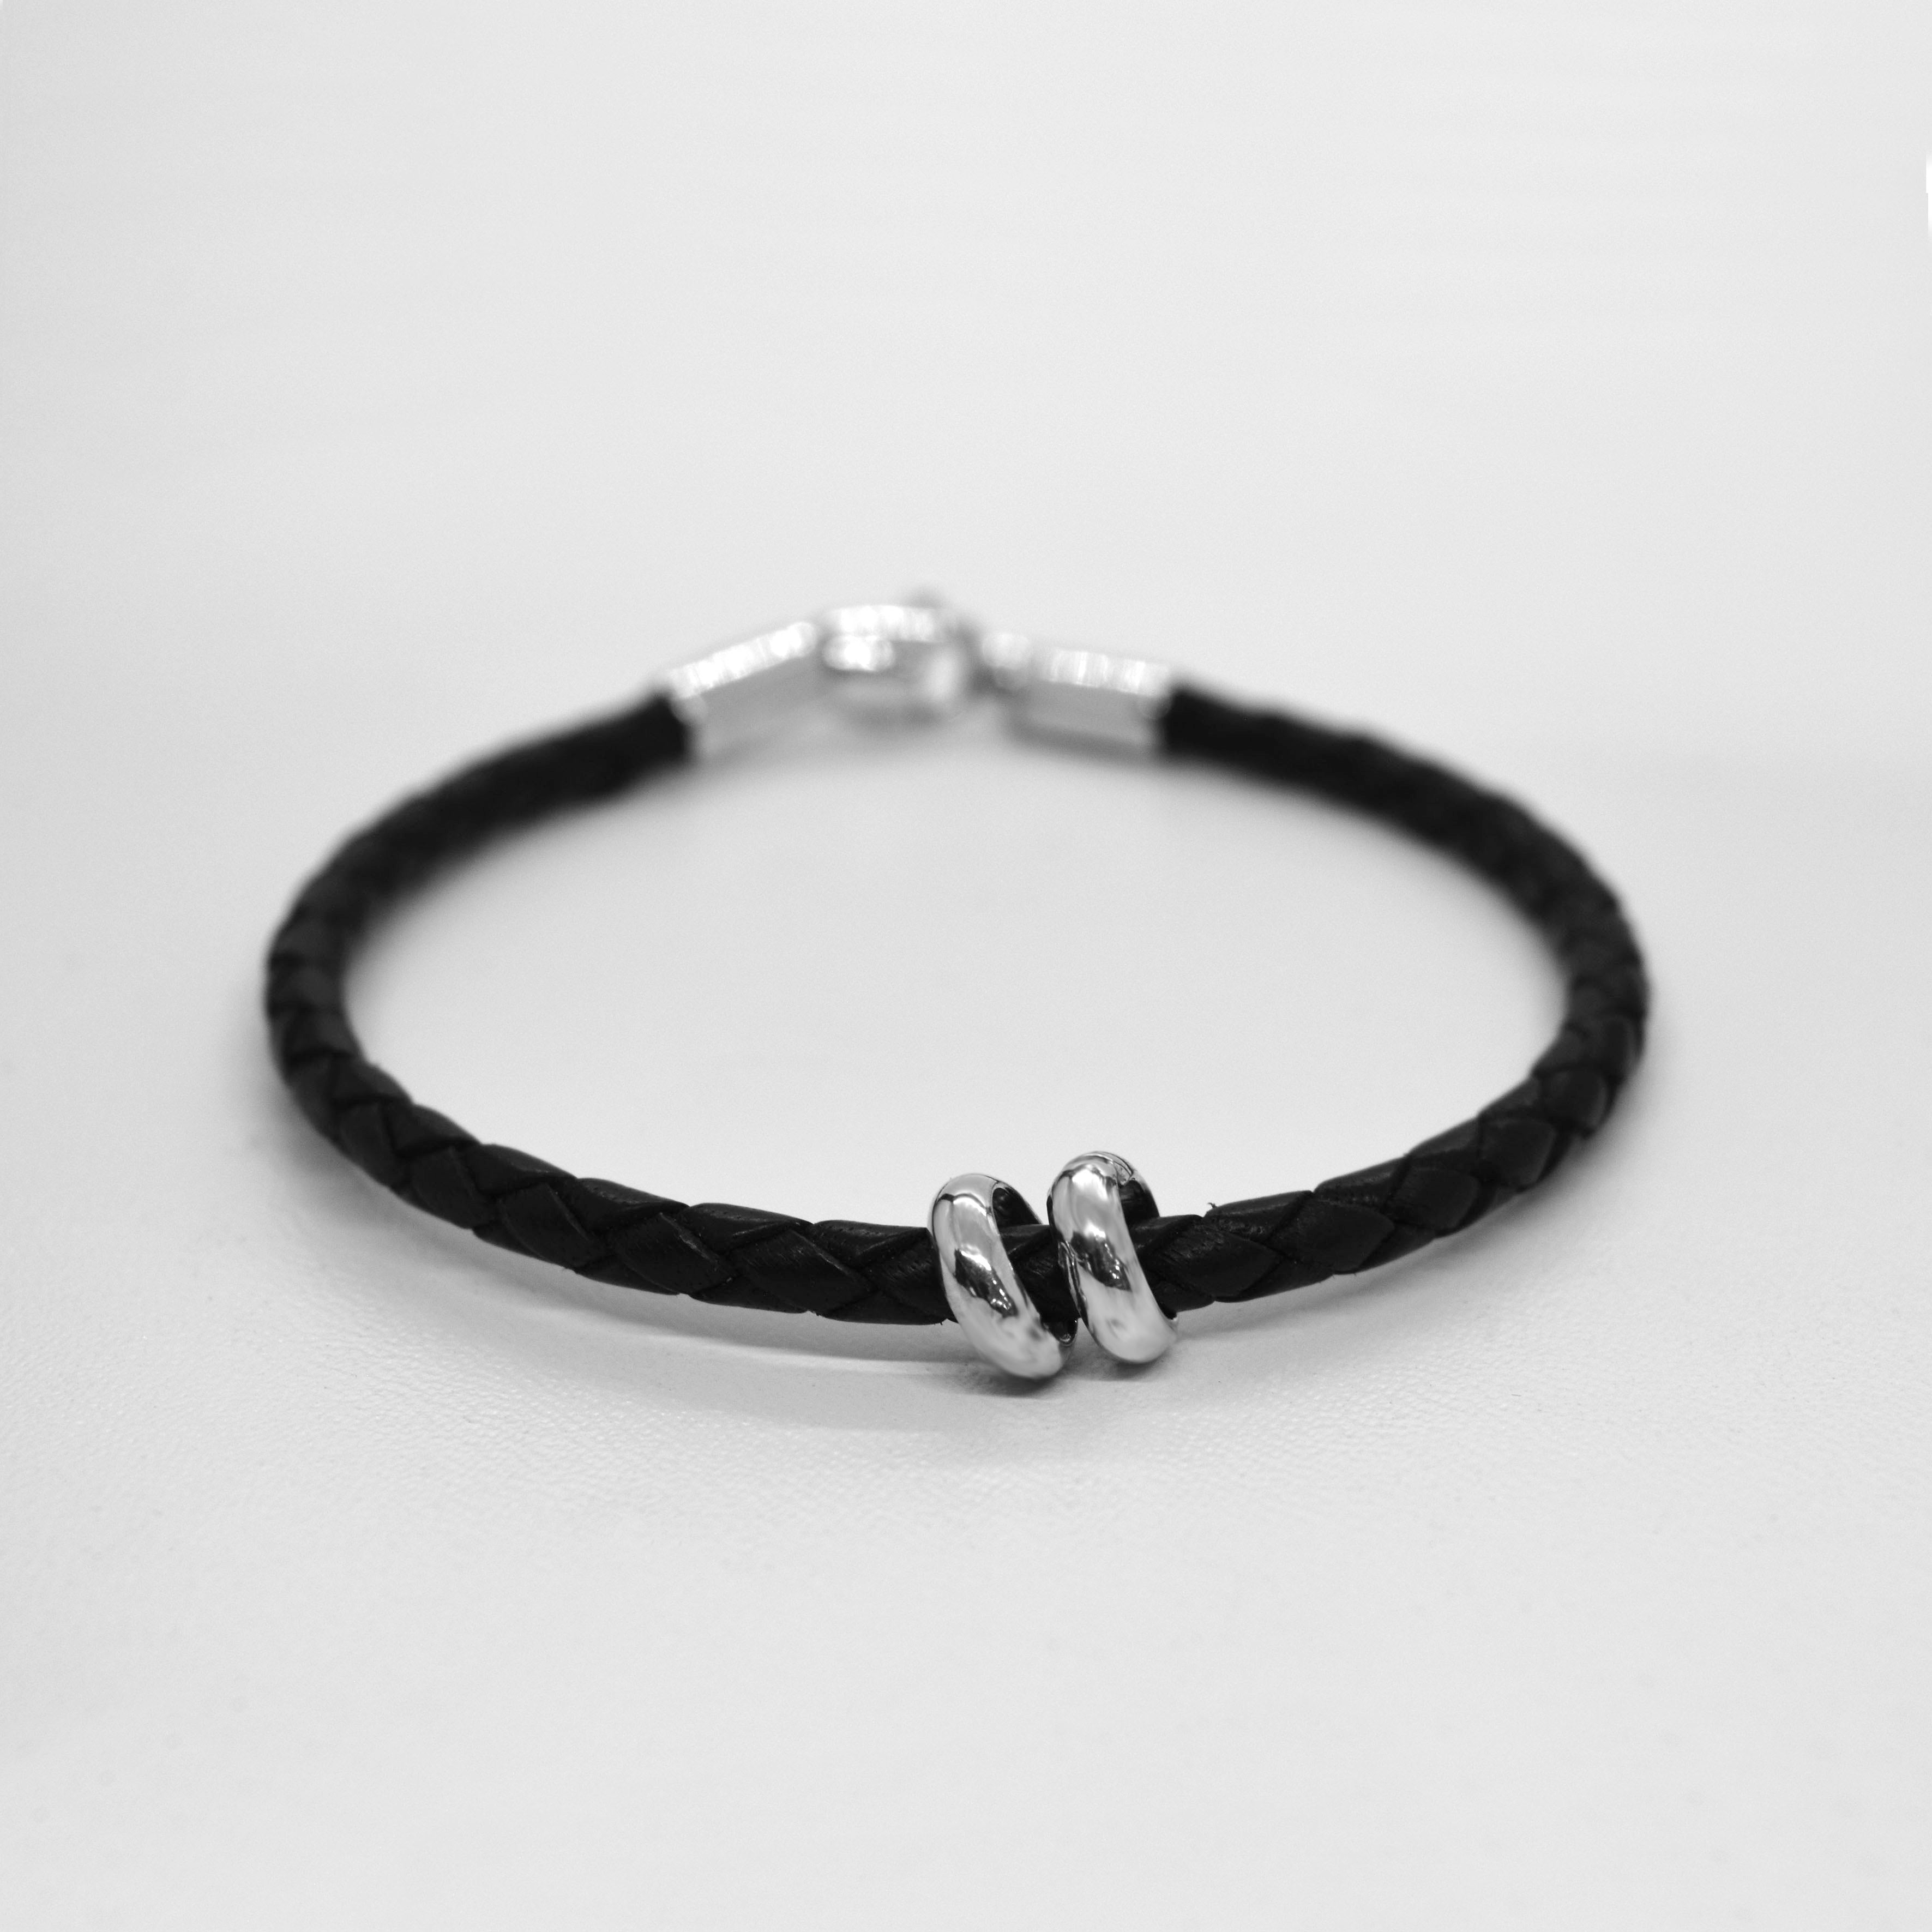 Braided leather bracelet with charms